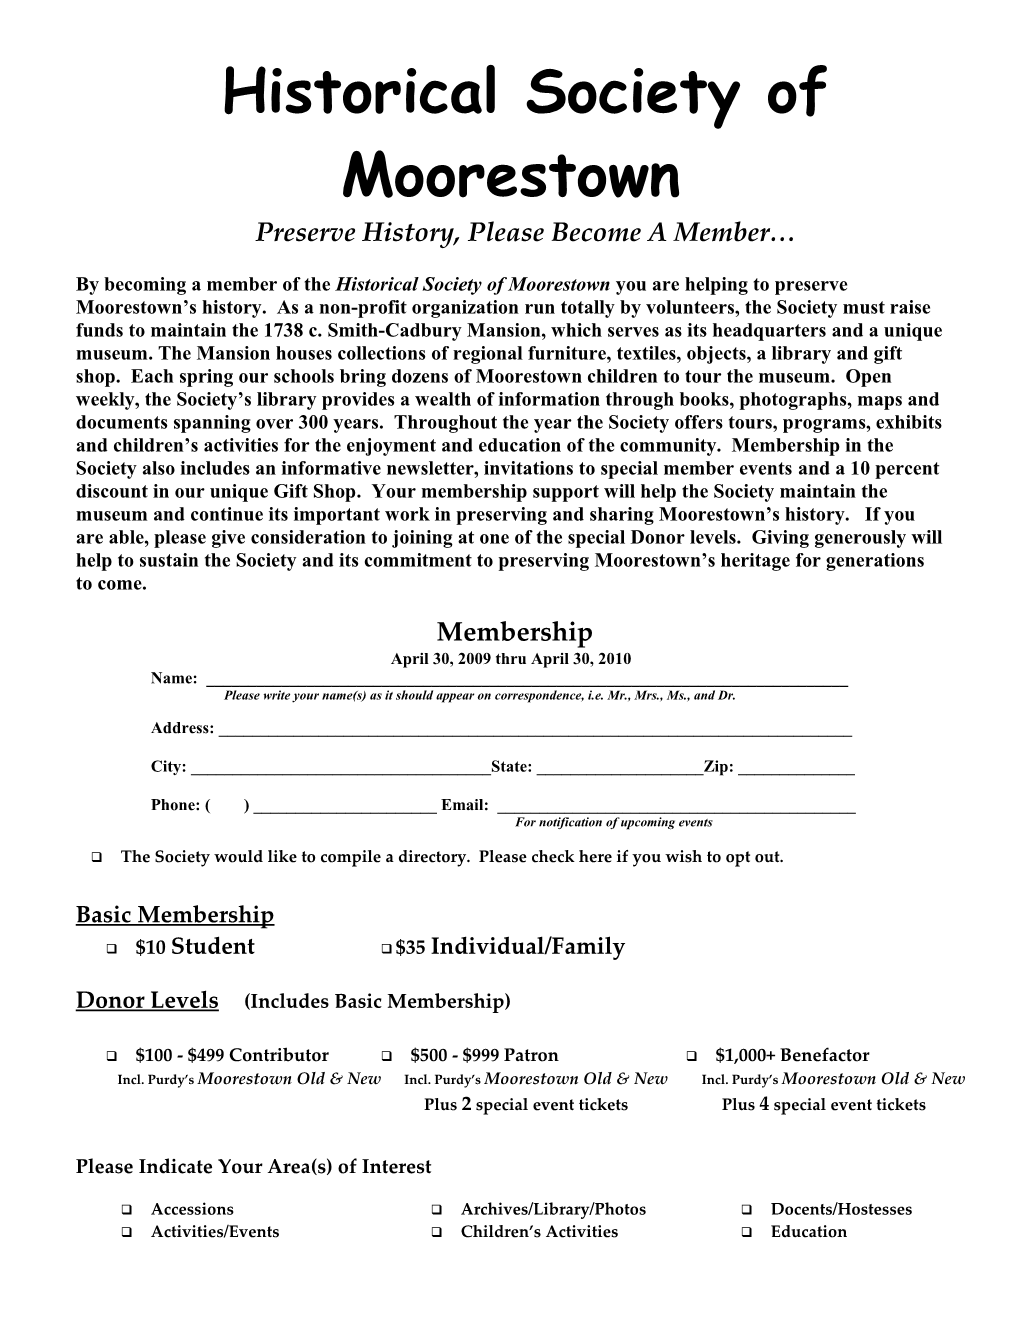 Historical Society of Moorestown